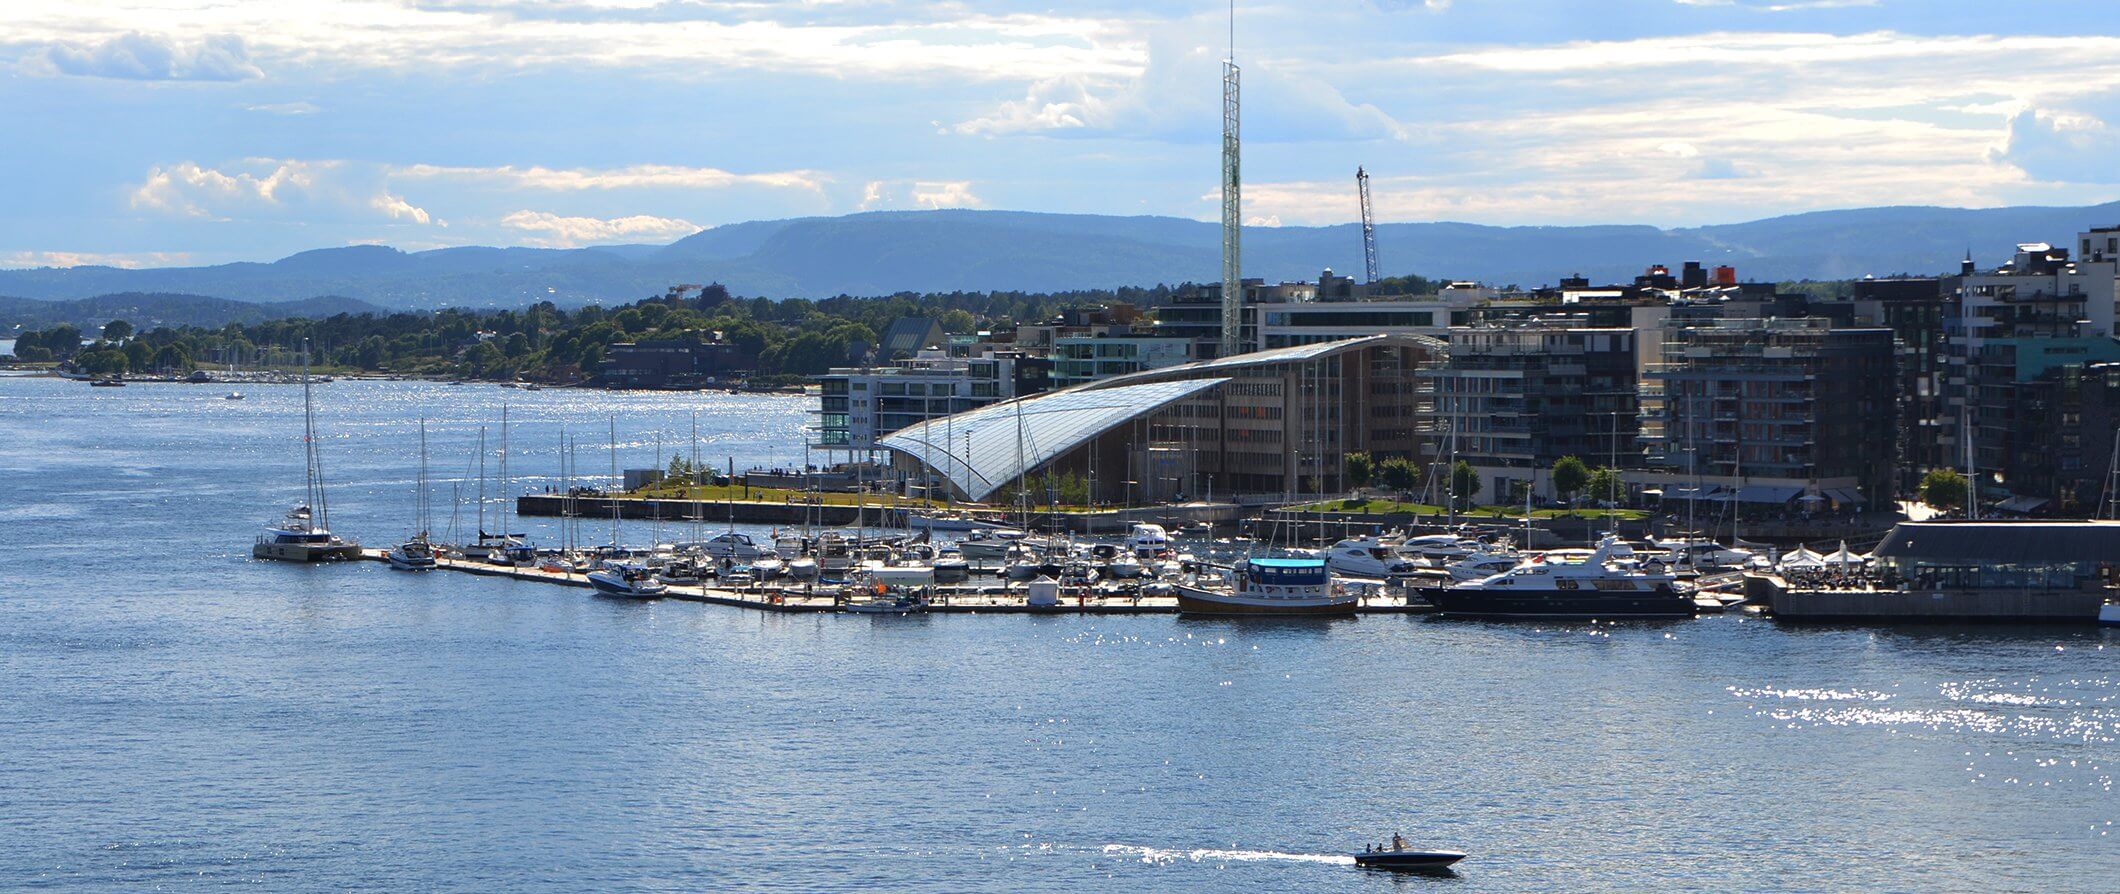 oslo travel guides